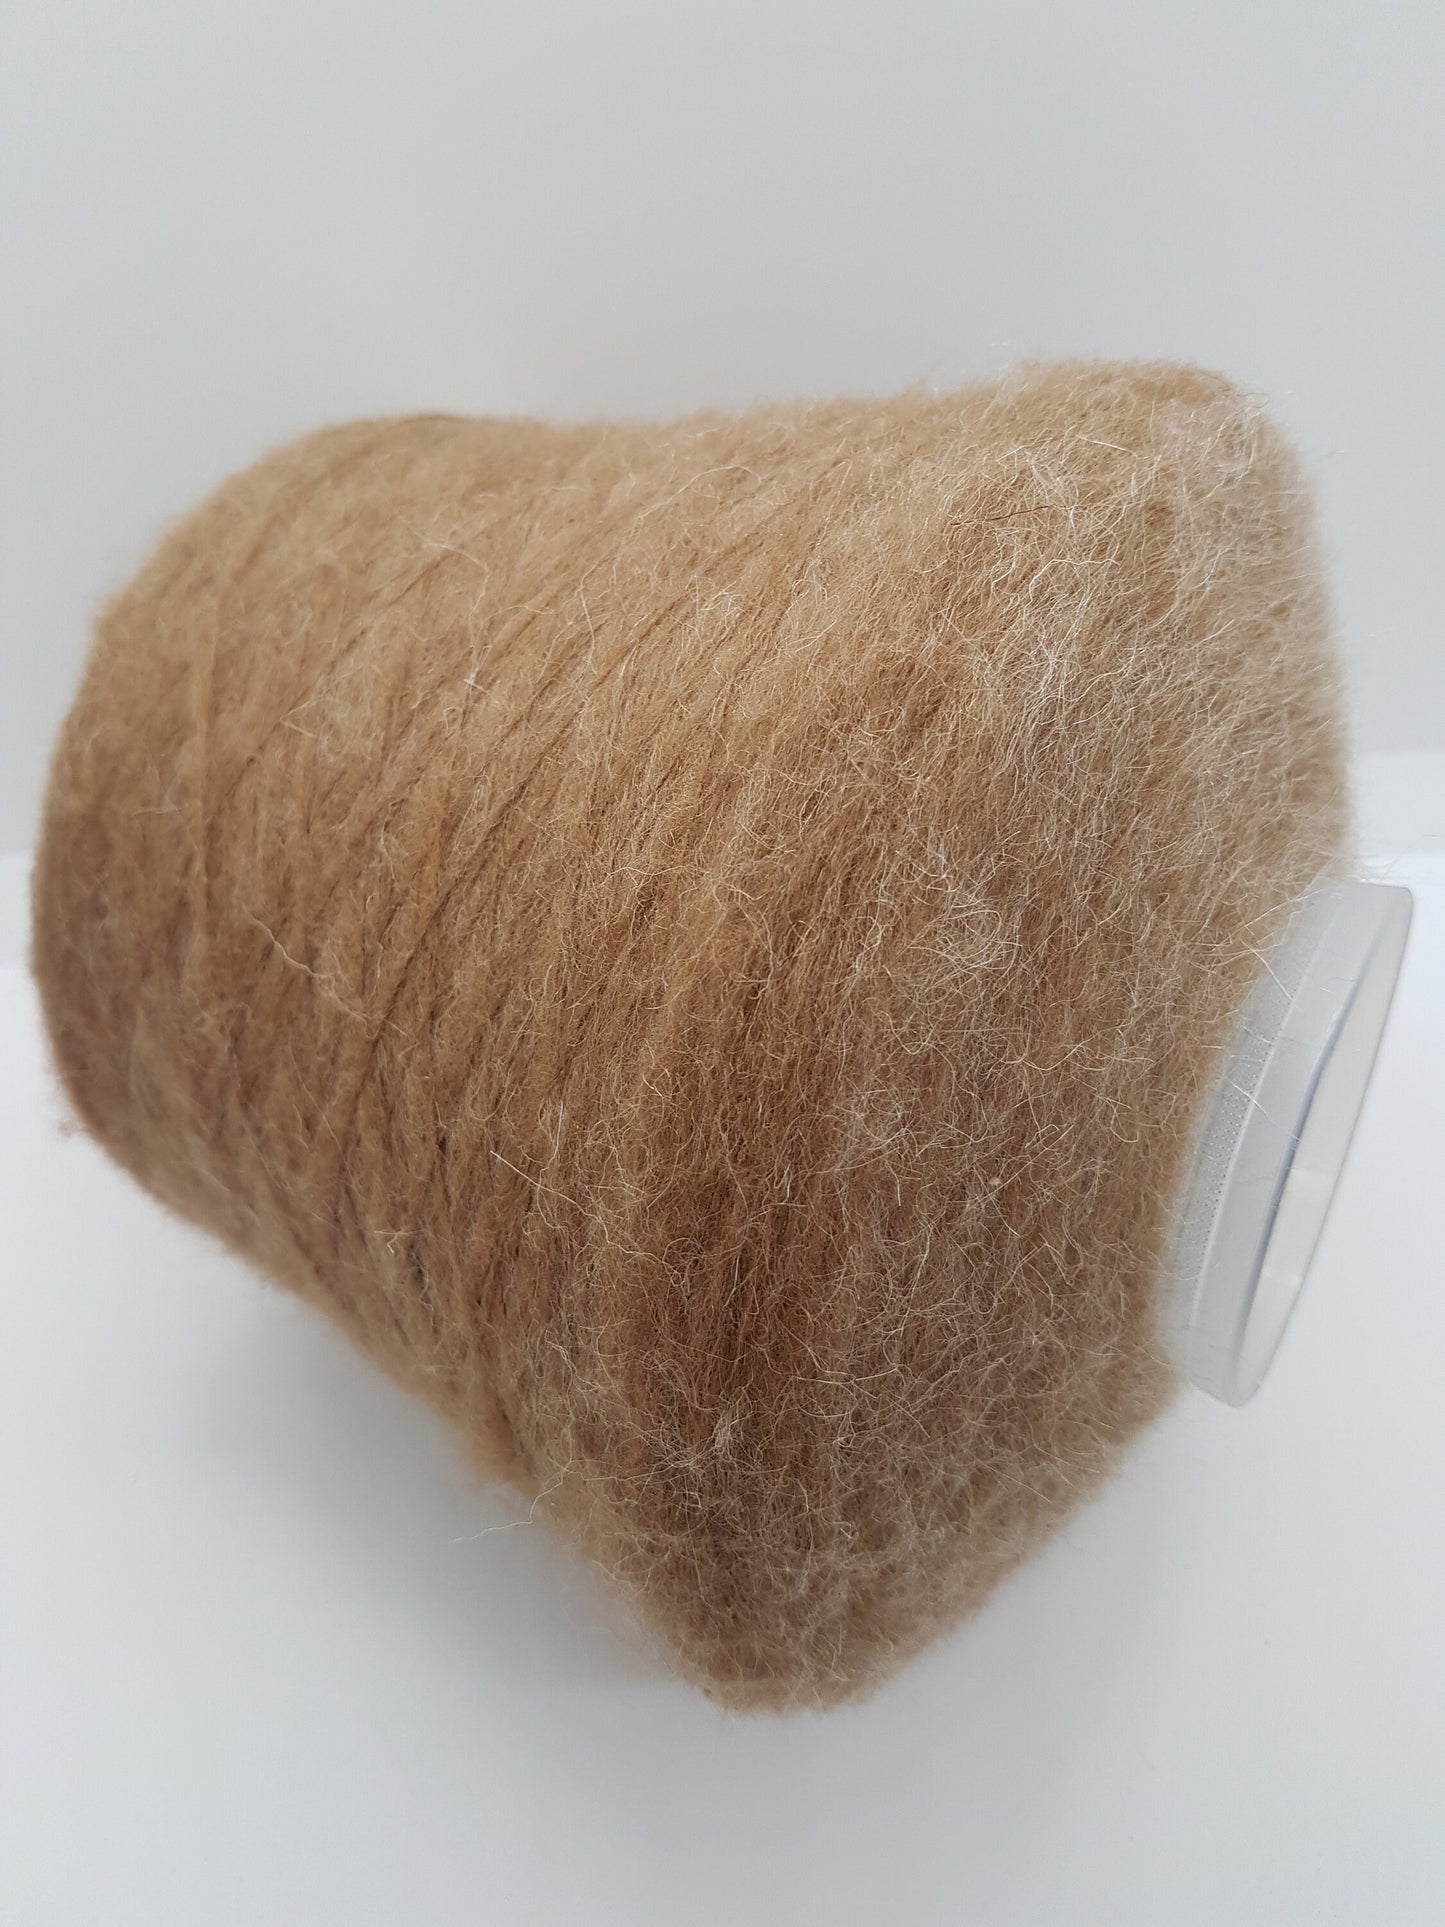 100g Mohair Italian Yarn color Light Brown /Walnuts/Camel in cake or on cone N.78